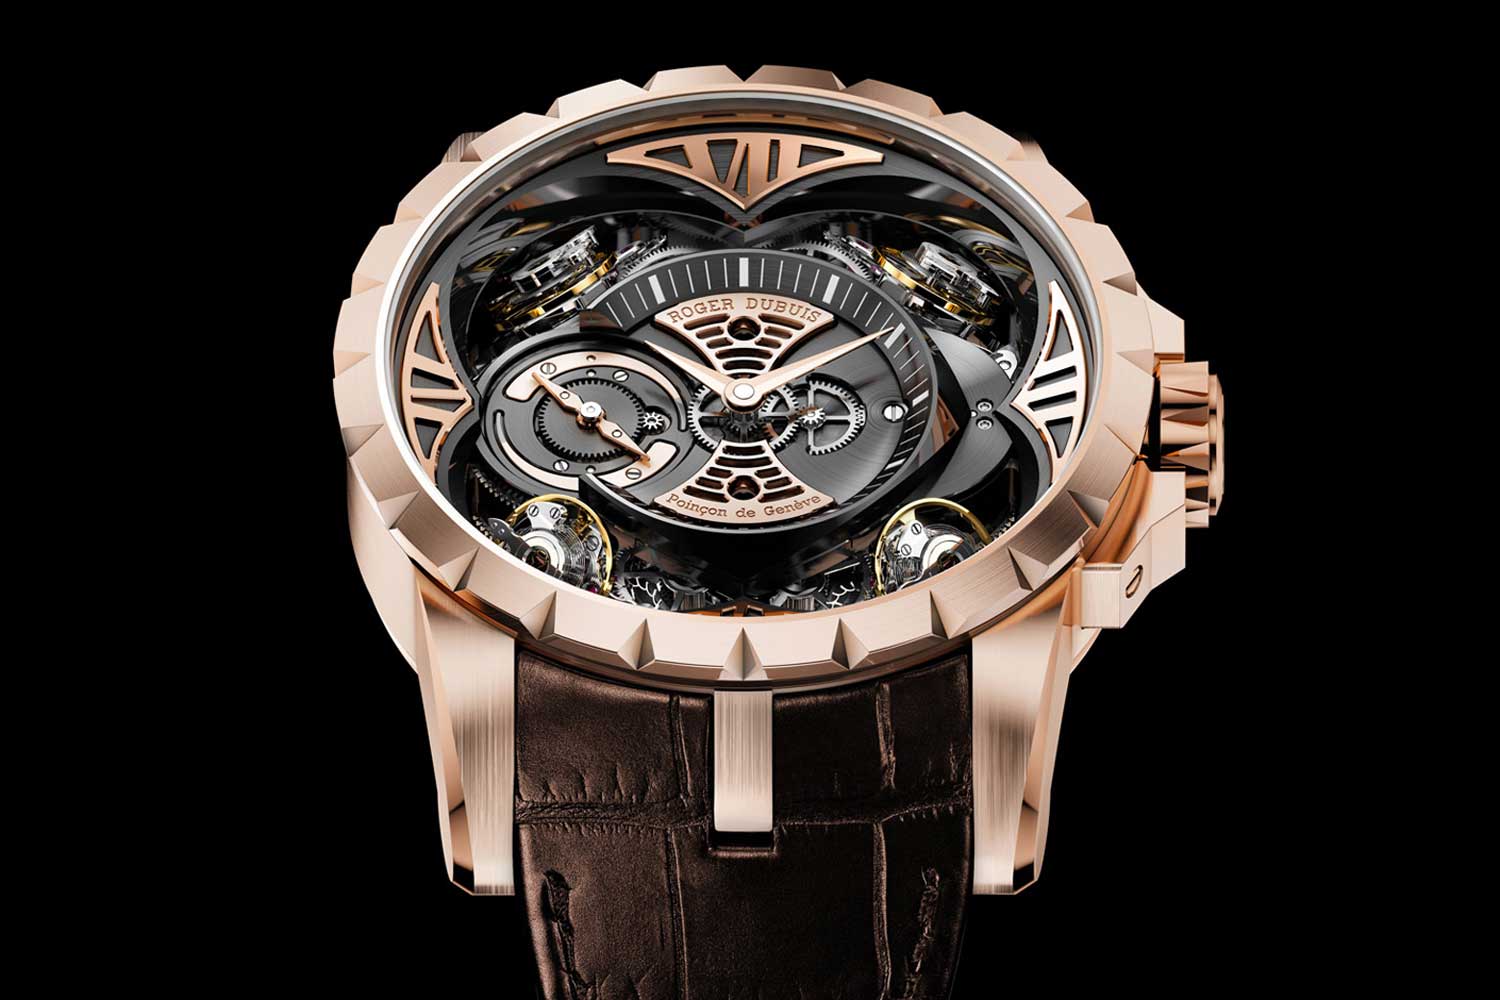 The Roger Dubuis Excalibur Quatuor equipped with four oscillators that are linked by three differentials